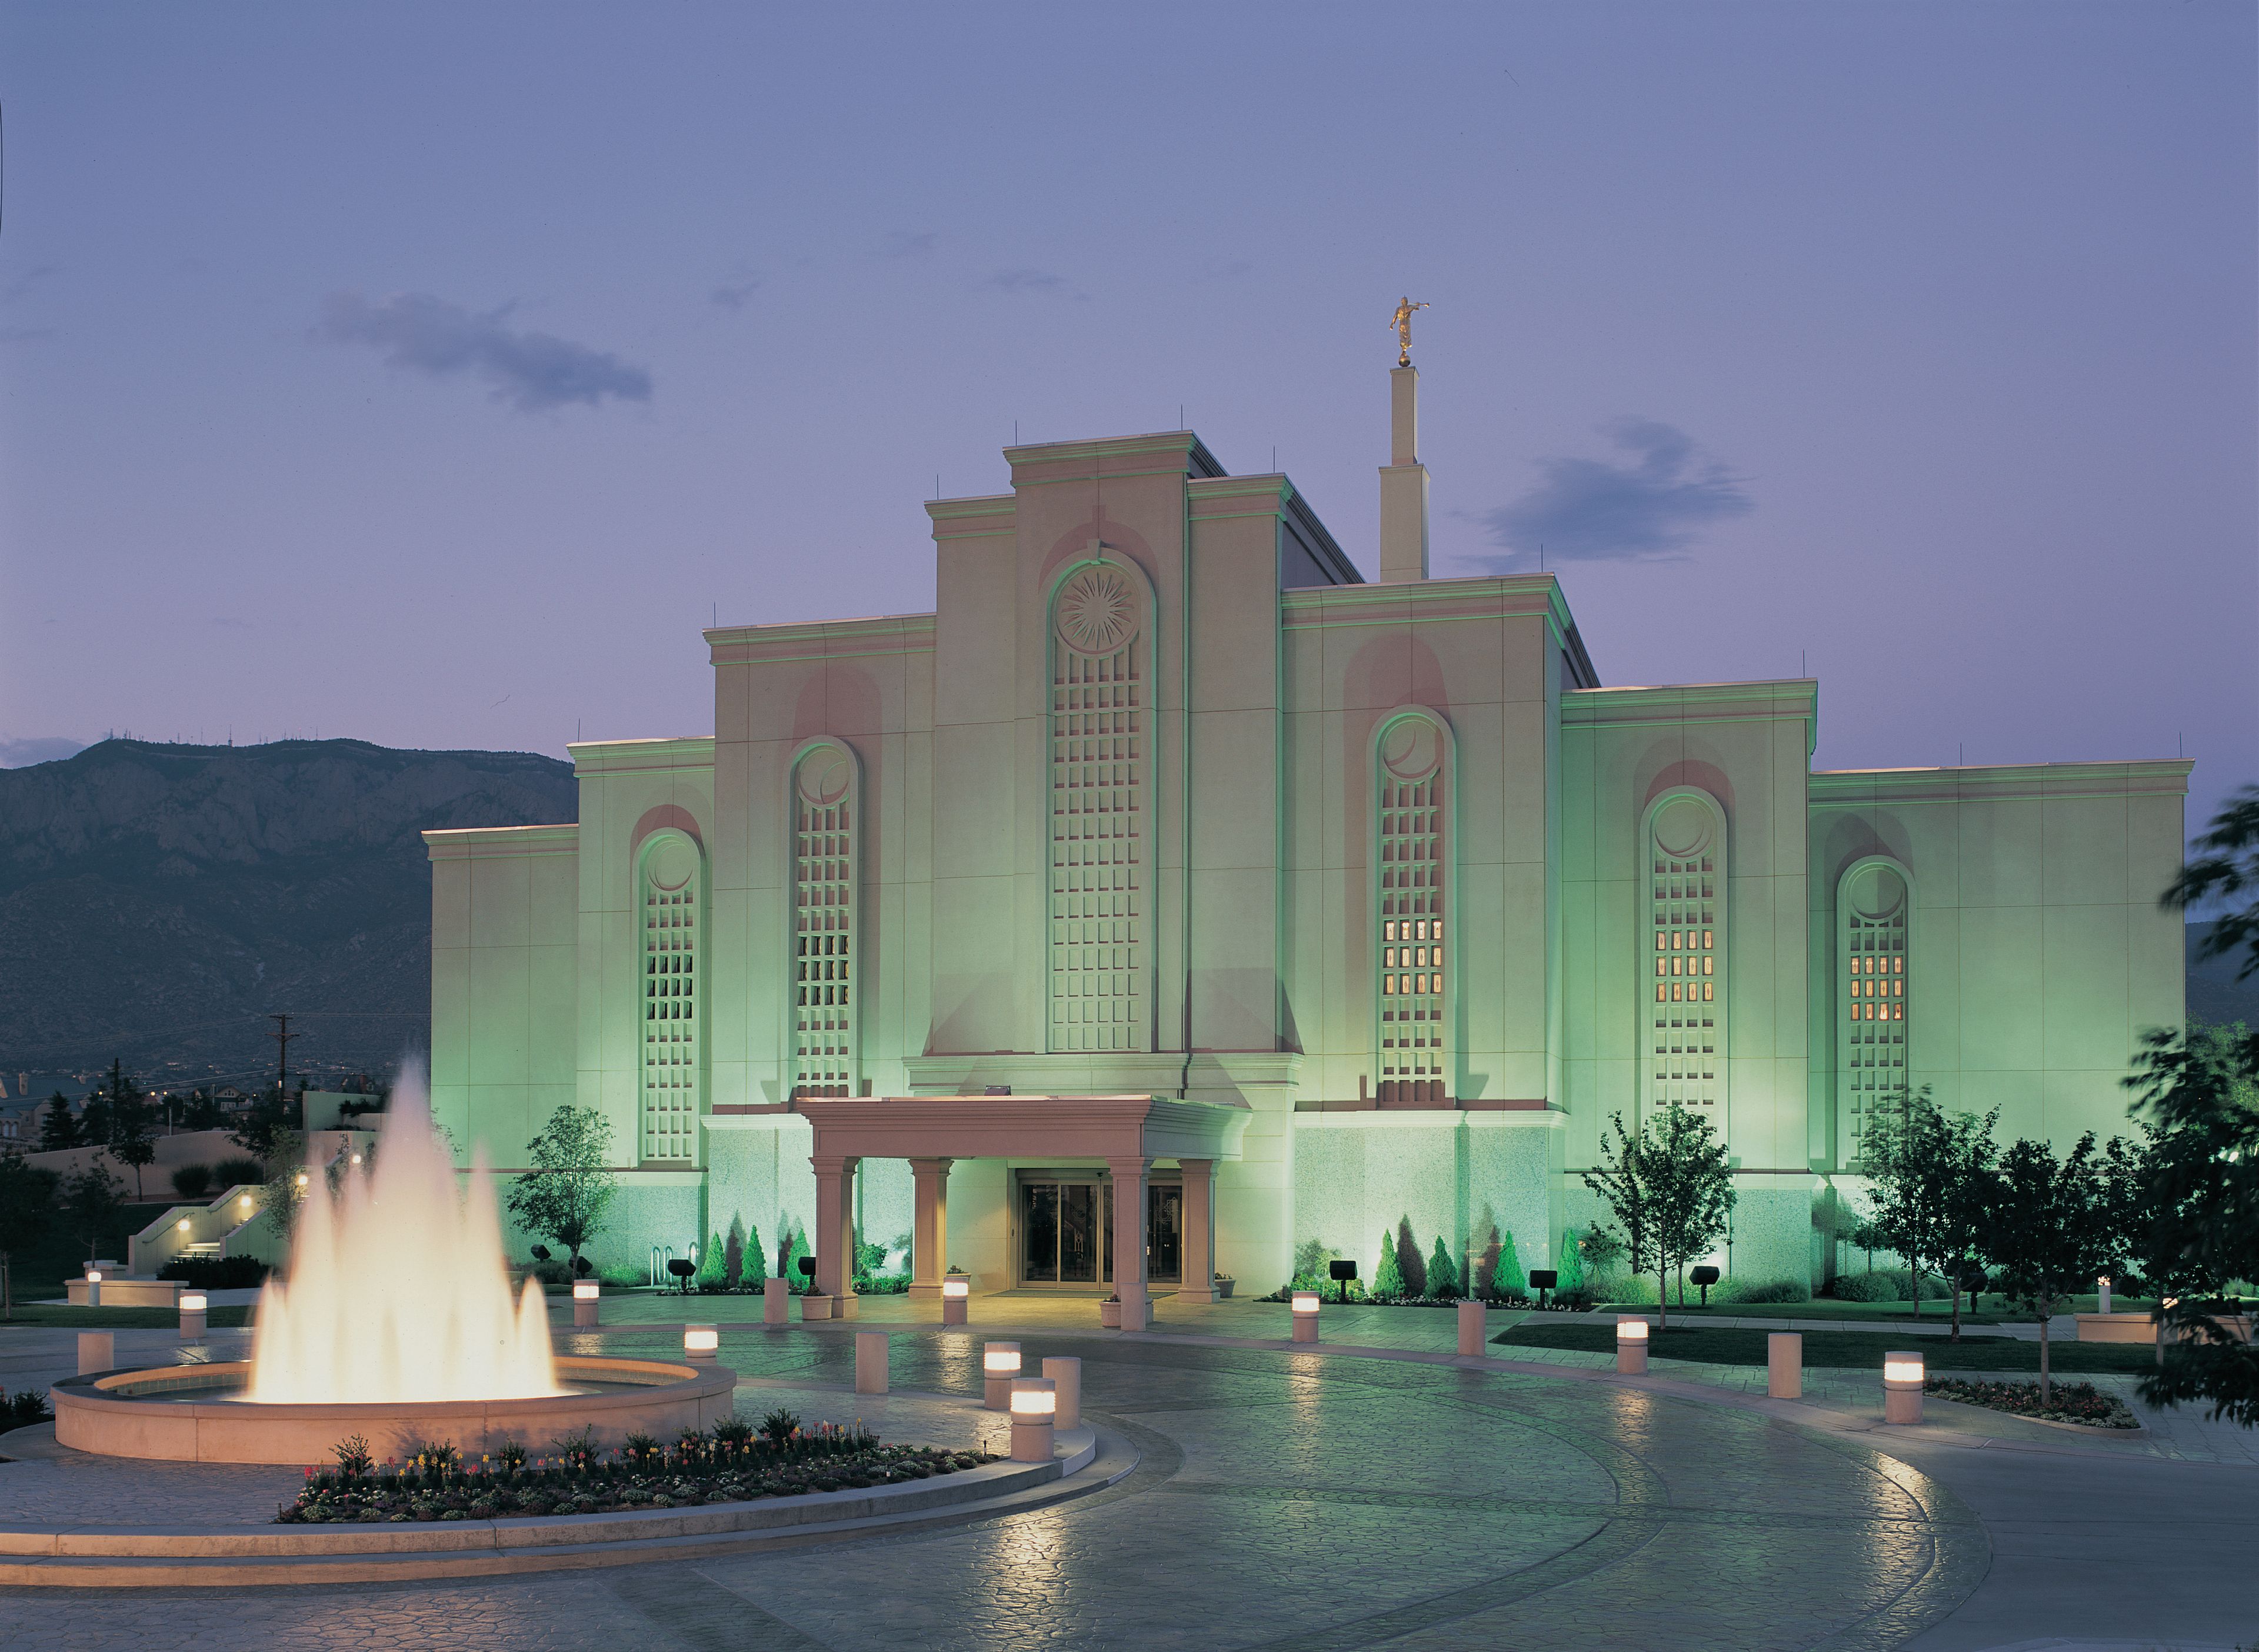 The exterior of the Albuquerque New Mexico Temple and grounds are lit up at night.